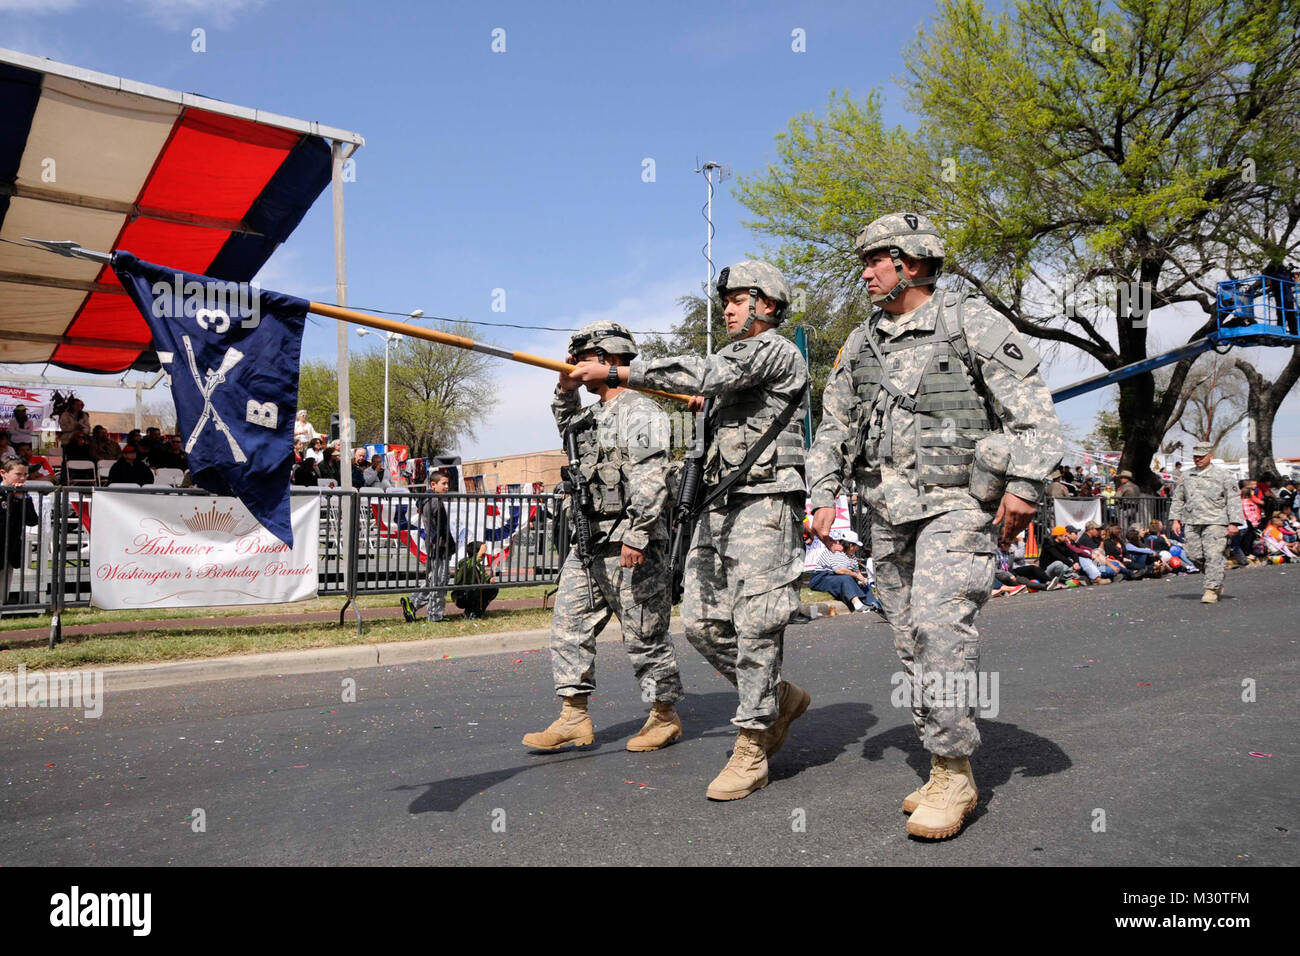 Soldiers from 3rd Battalion, 141st Infantry Regiment, Texas Army National Guard, participate at the 2013 George Washington Birthday Celebration Parade in Laredo, TX, Feb. 23, 2013. The event is part of a two-week long celebration, recognizing the former president. (National Guard photo by Army Staff Sgt. Malcolm McClendon). Texas Military Forces participate in George Washington Birthday Celebration by Texas Military Department Stock Photo